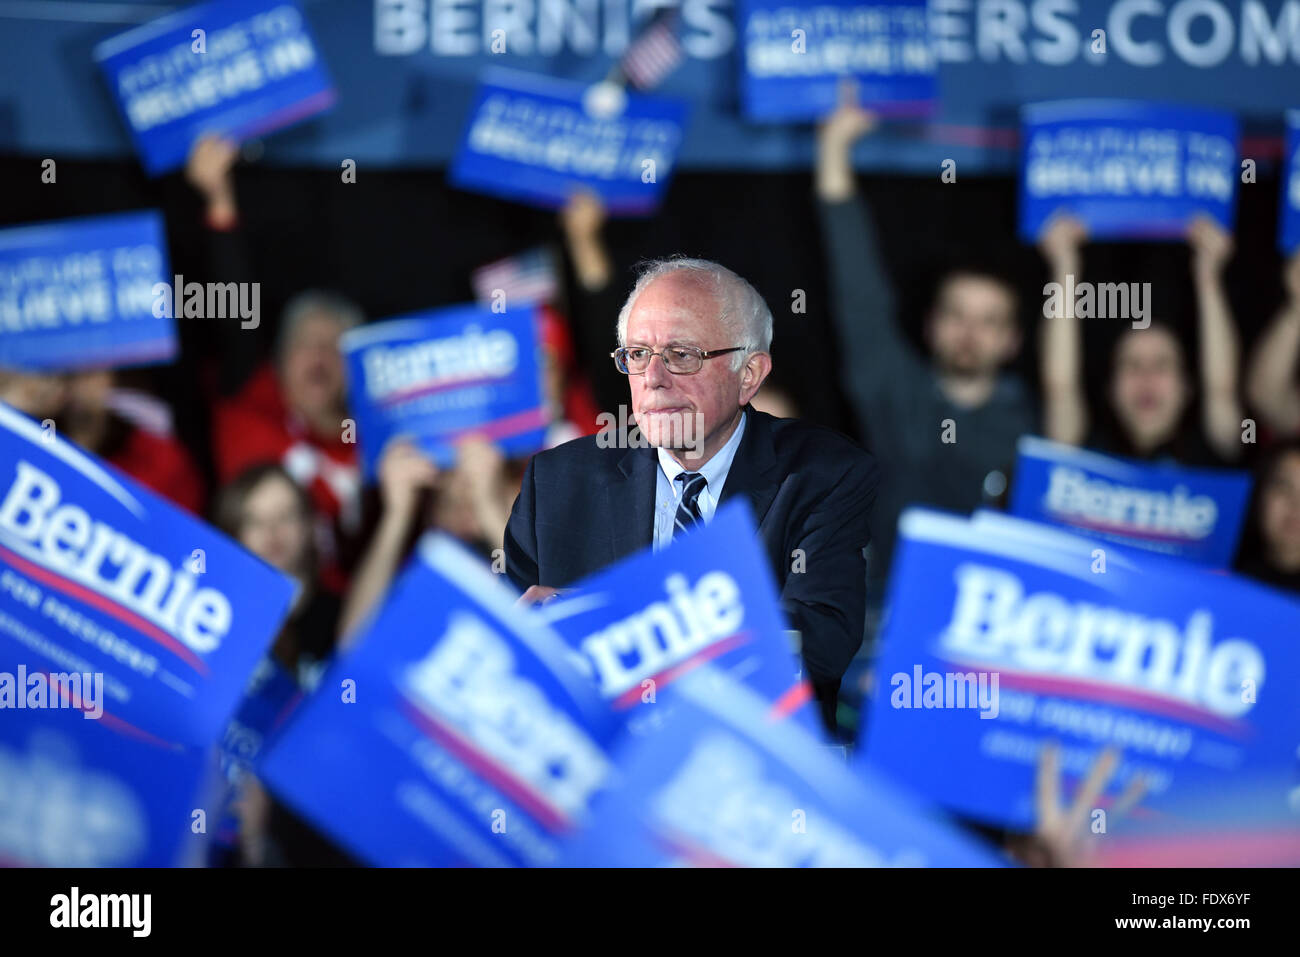 Iowa, USA. 31st Jan, 2016. Democratic presidential candidate Bernie Sanders speaks at a rally in Des Moins, Iowa, the United States, Jan. 31, 2016. Hillary Clinton won Bernie Sanders with a razor-thin lead in the Iowa caucuses, according to results announced by Iowa Democratic Party Tuesday. © Yin Bogu/Xinhua/Alamy Live News Stock Photo